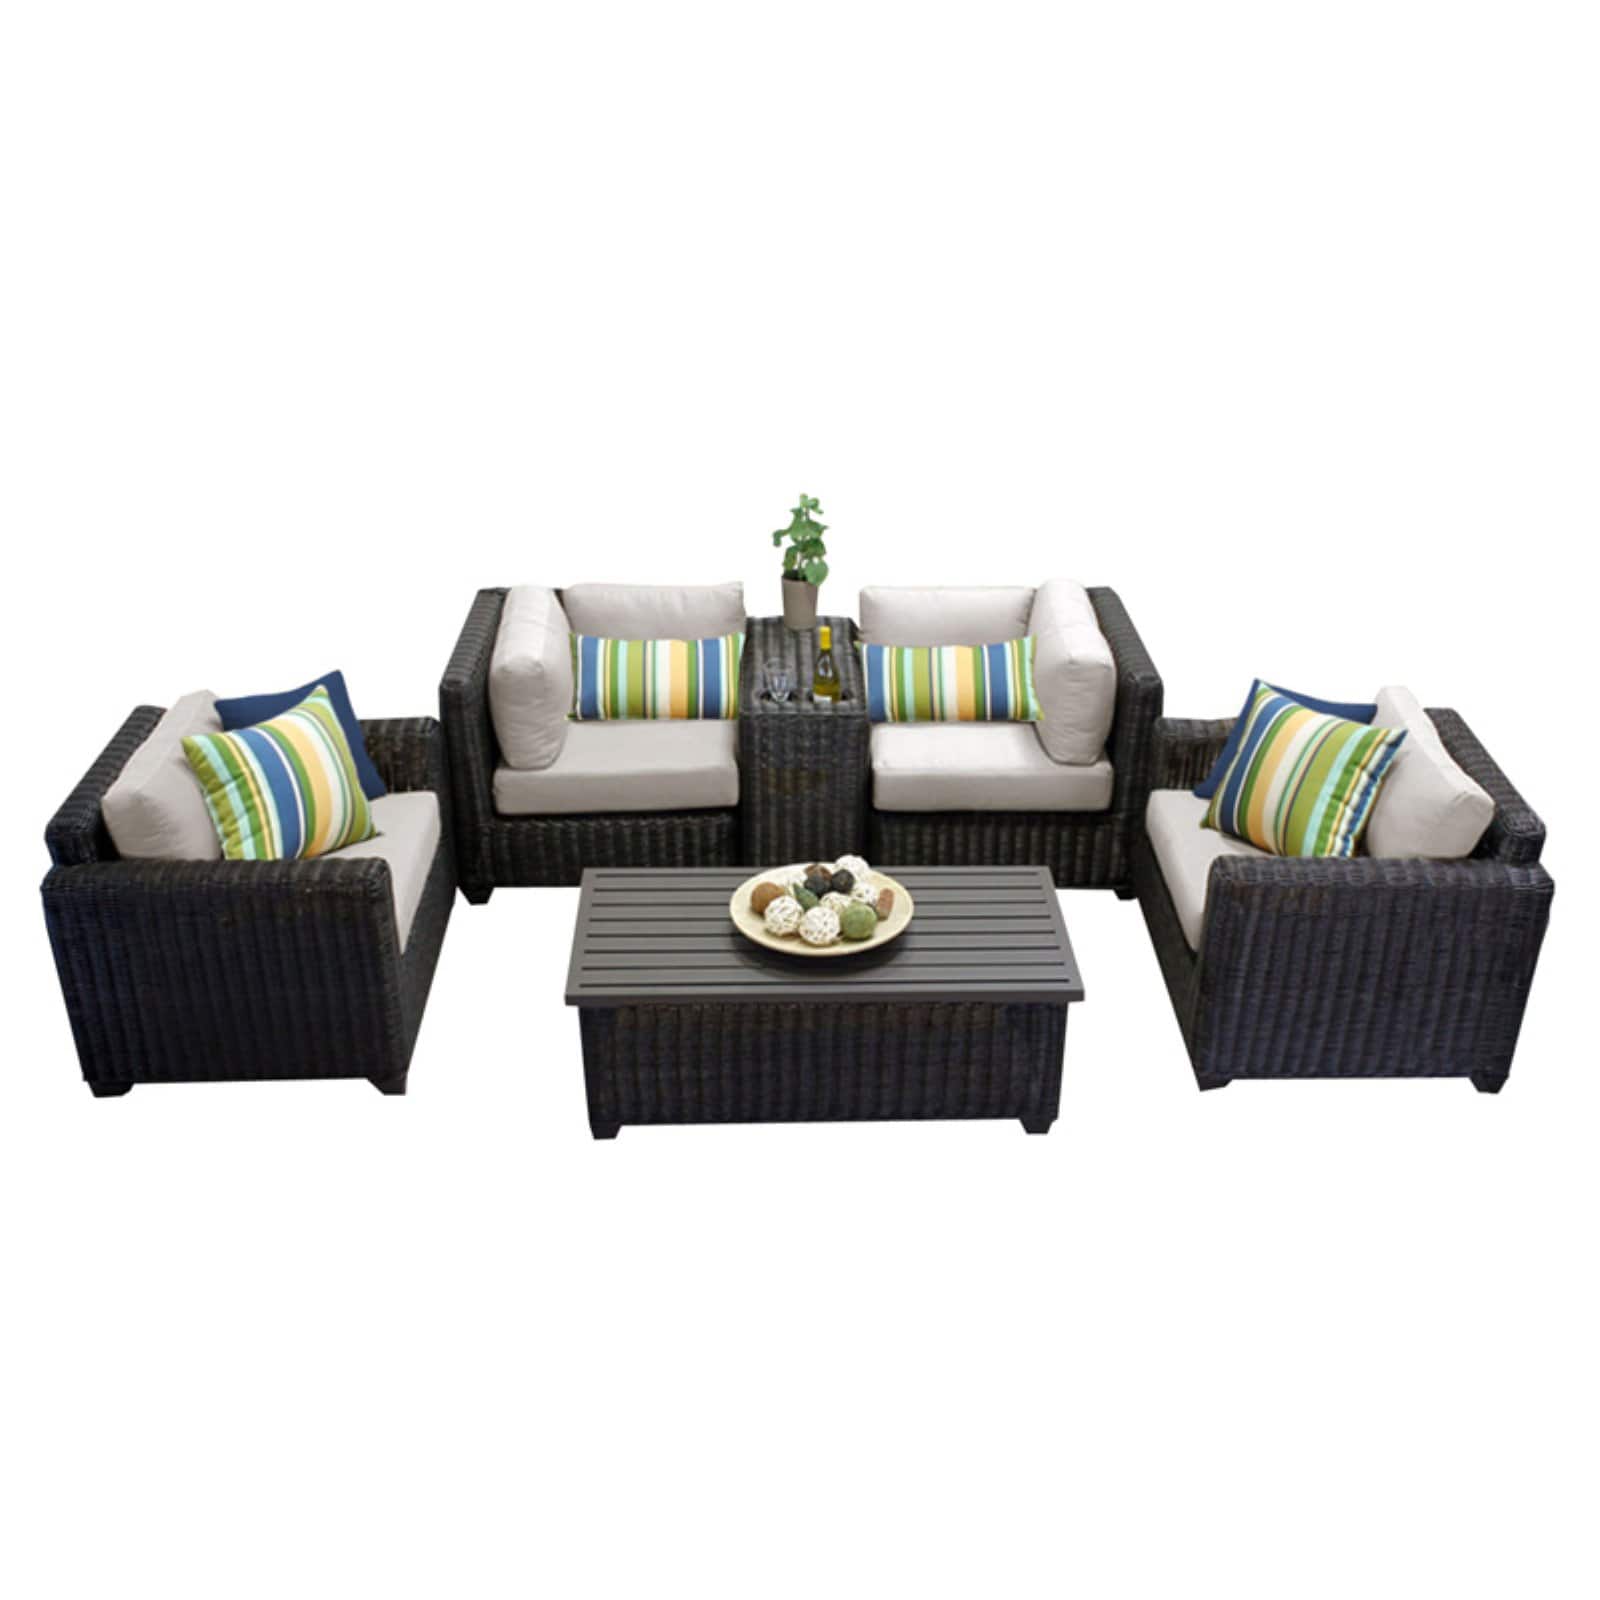 TK Classics Venice Wicker 6 Piece Patio Conversation Set with Coffee Table and 2 Sets of Cushion Covers - image 3 of 3